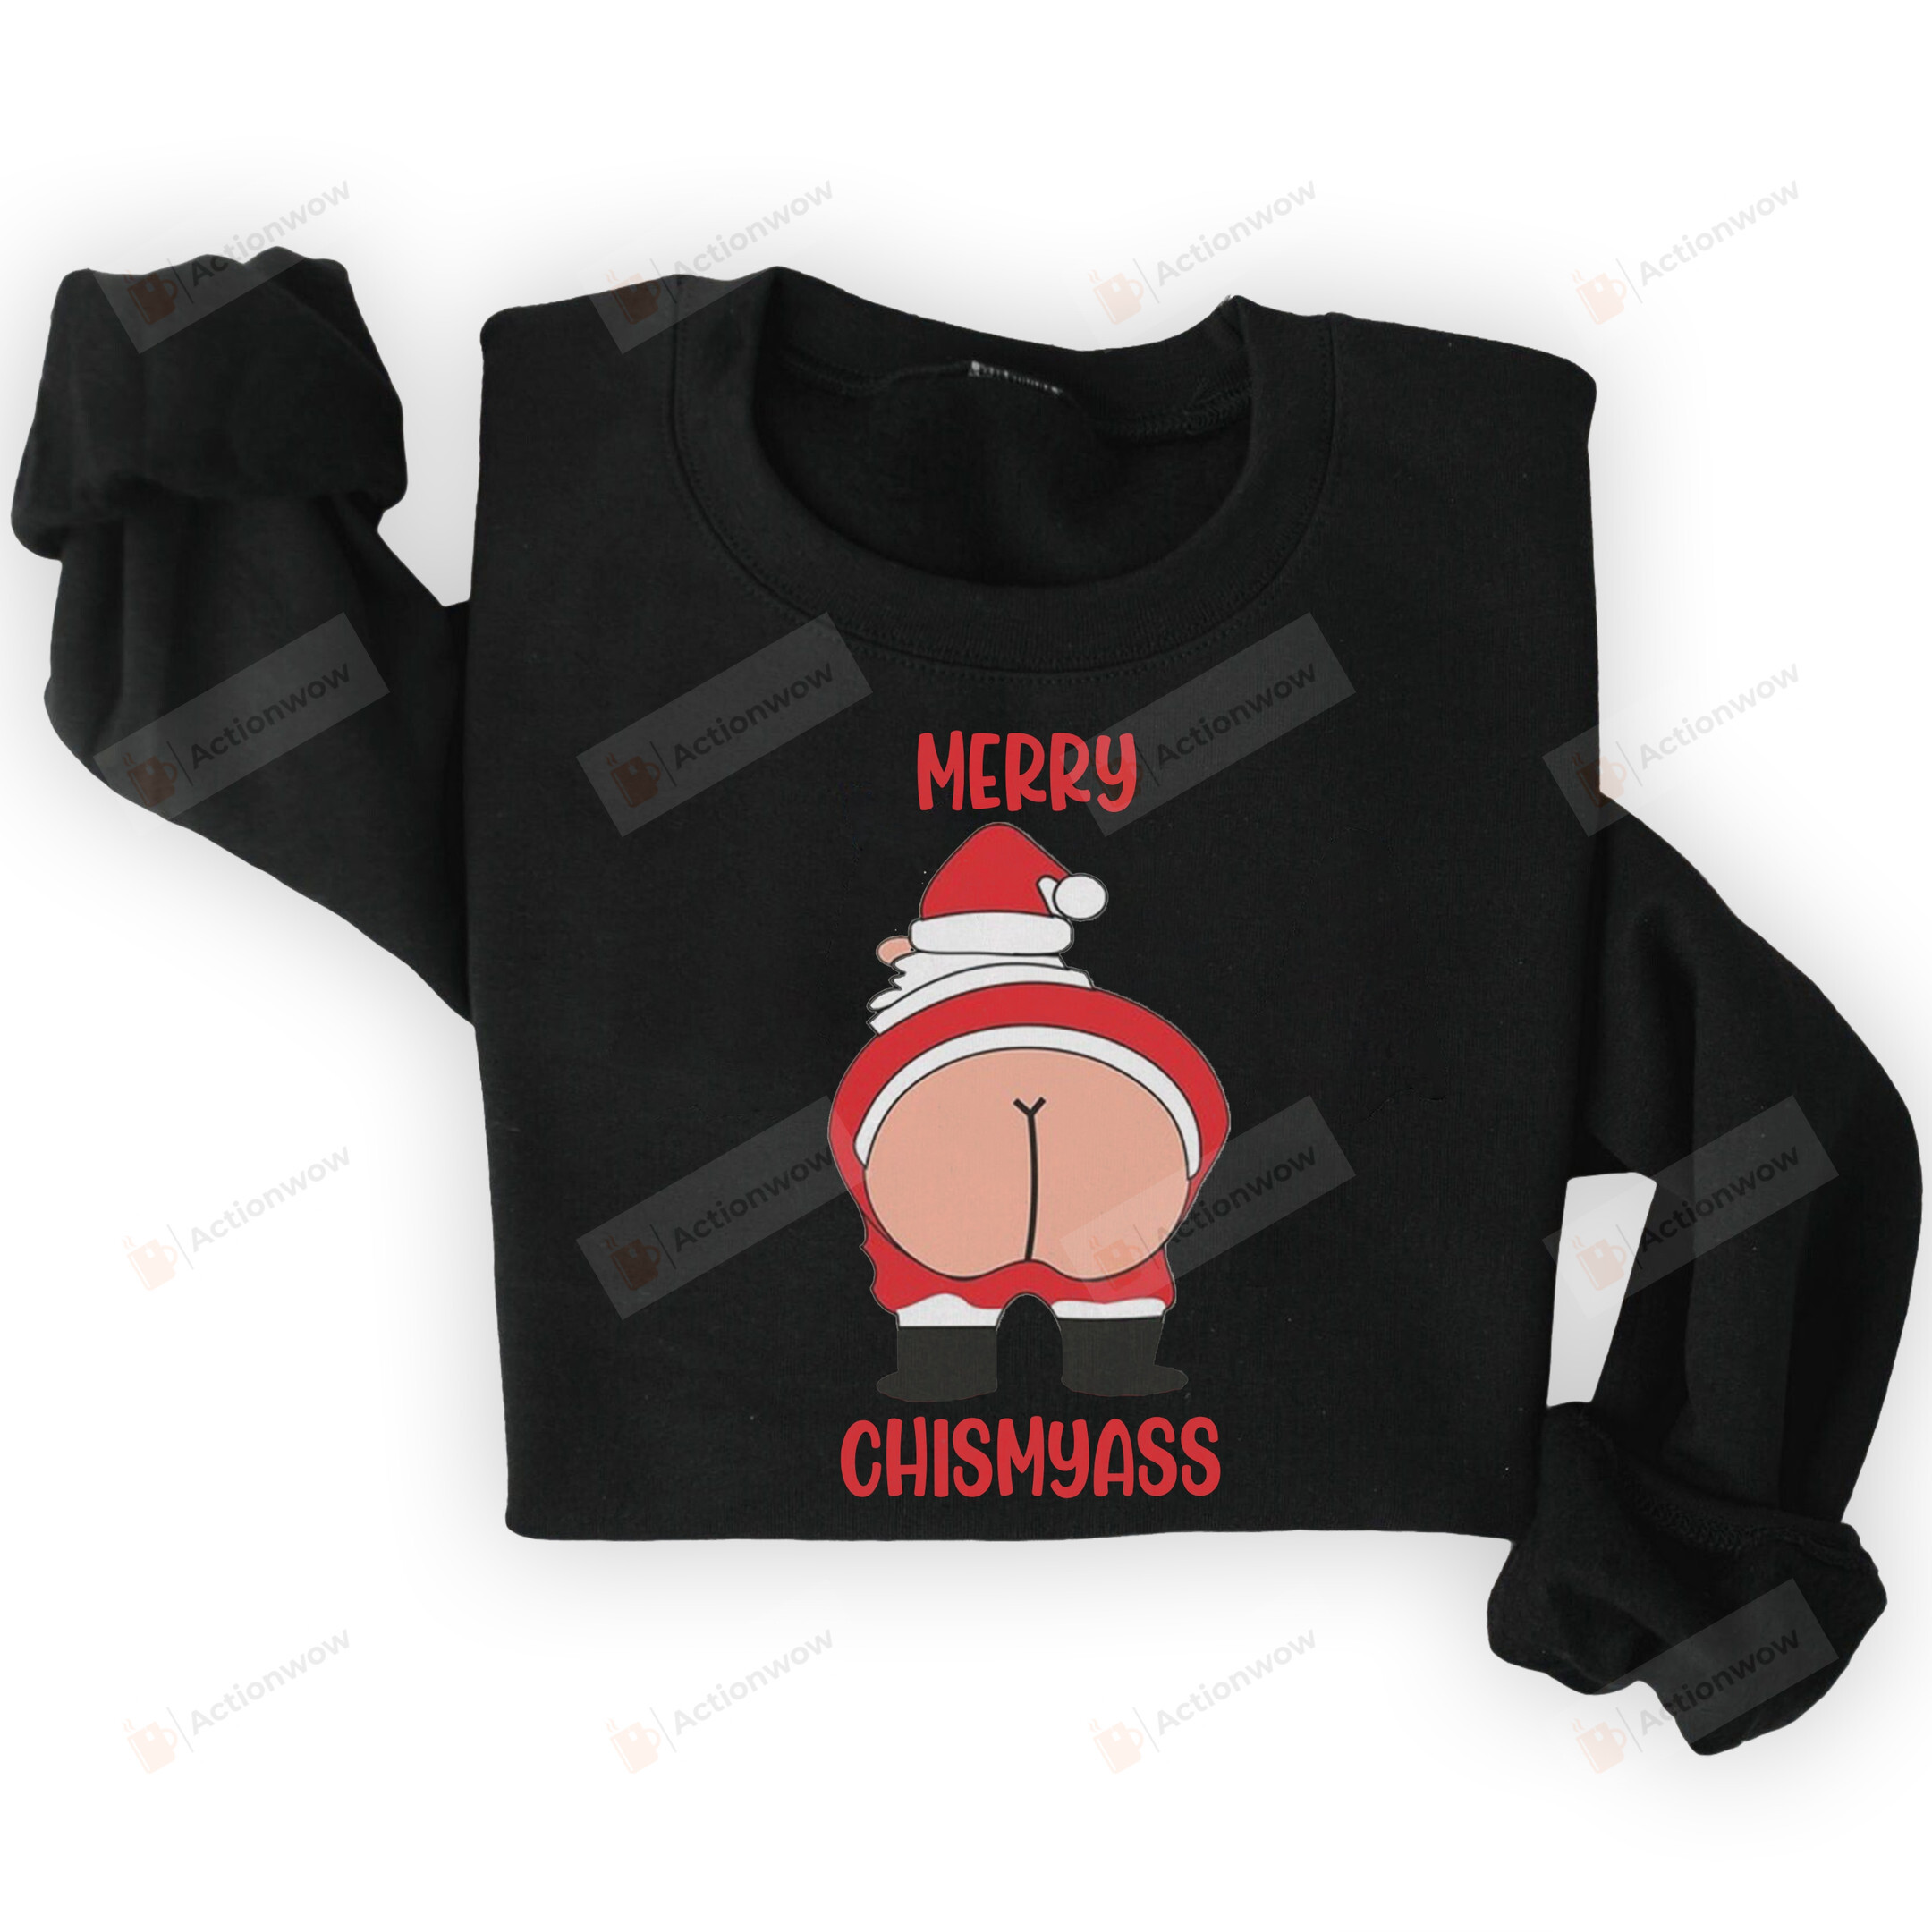 Merry Chismyass Sweatshirt, Funny Christmas Gifts For Women, Holiday Long Sleeve Shirt Women, Gifts For Friend For Family